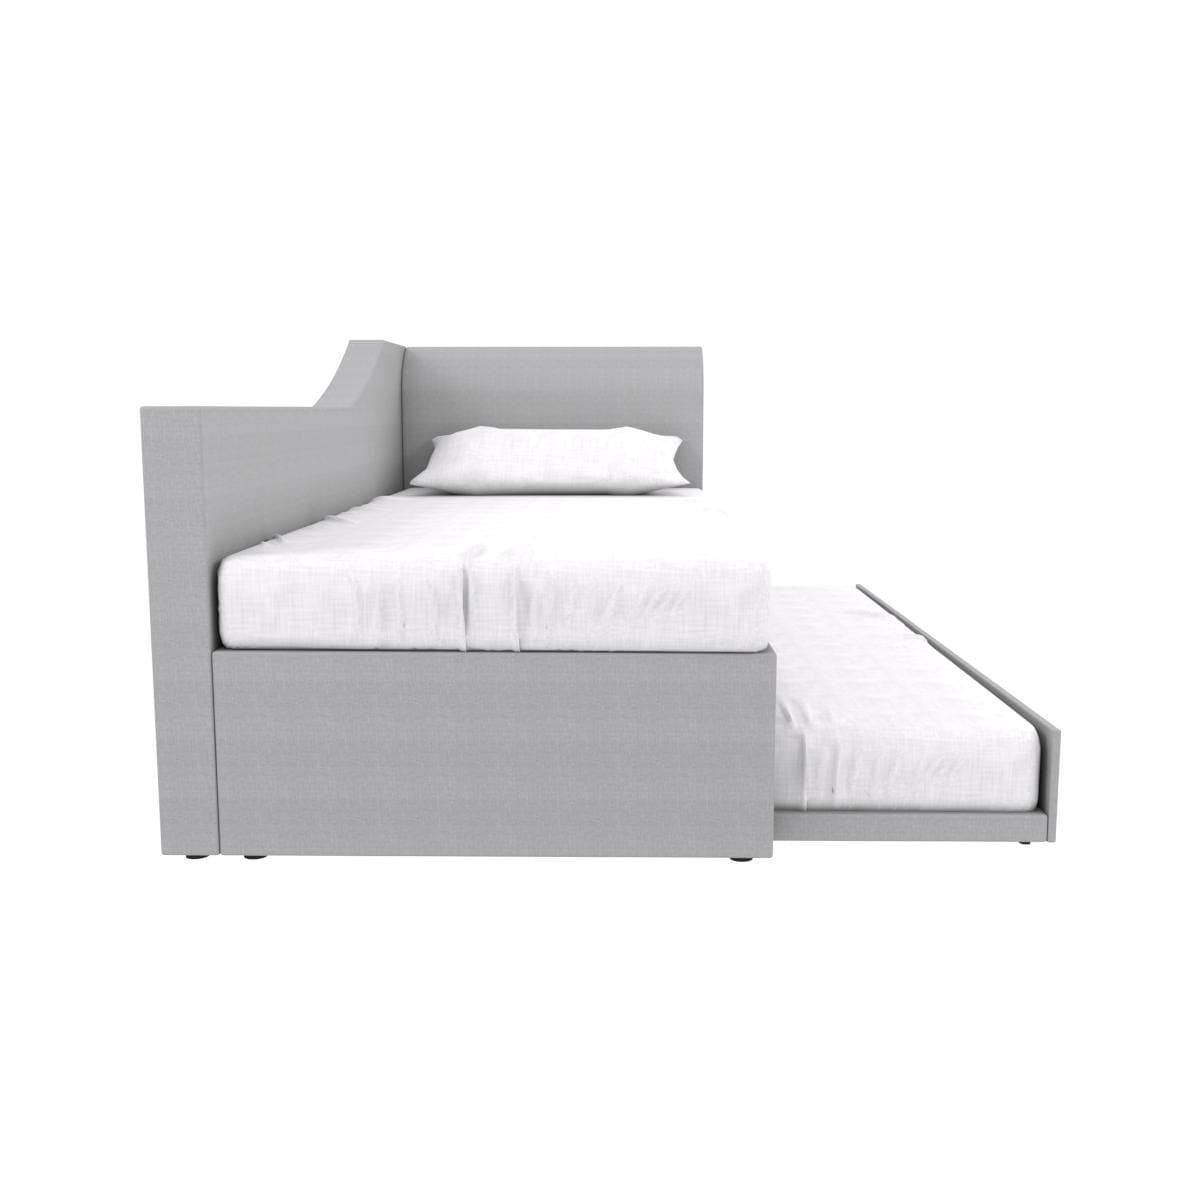 Barry 3 in 1 Grey Fabric Daybed Pull Out Bed Frame (Water Repellent) Singapore